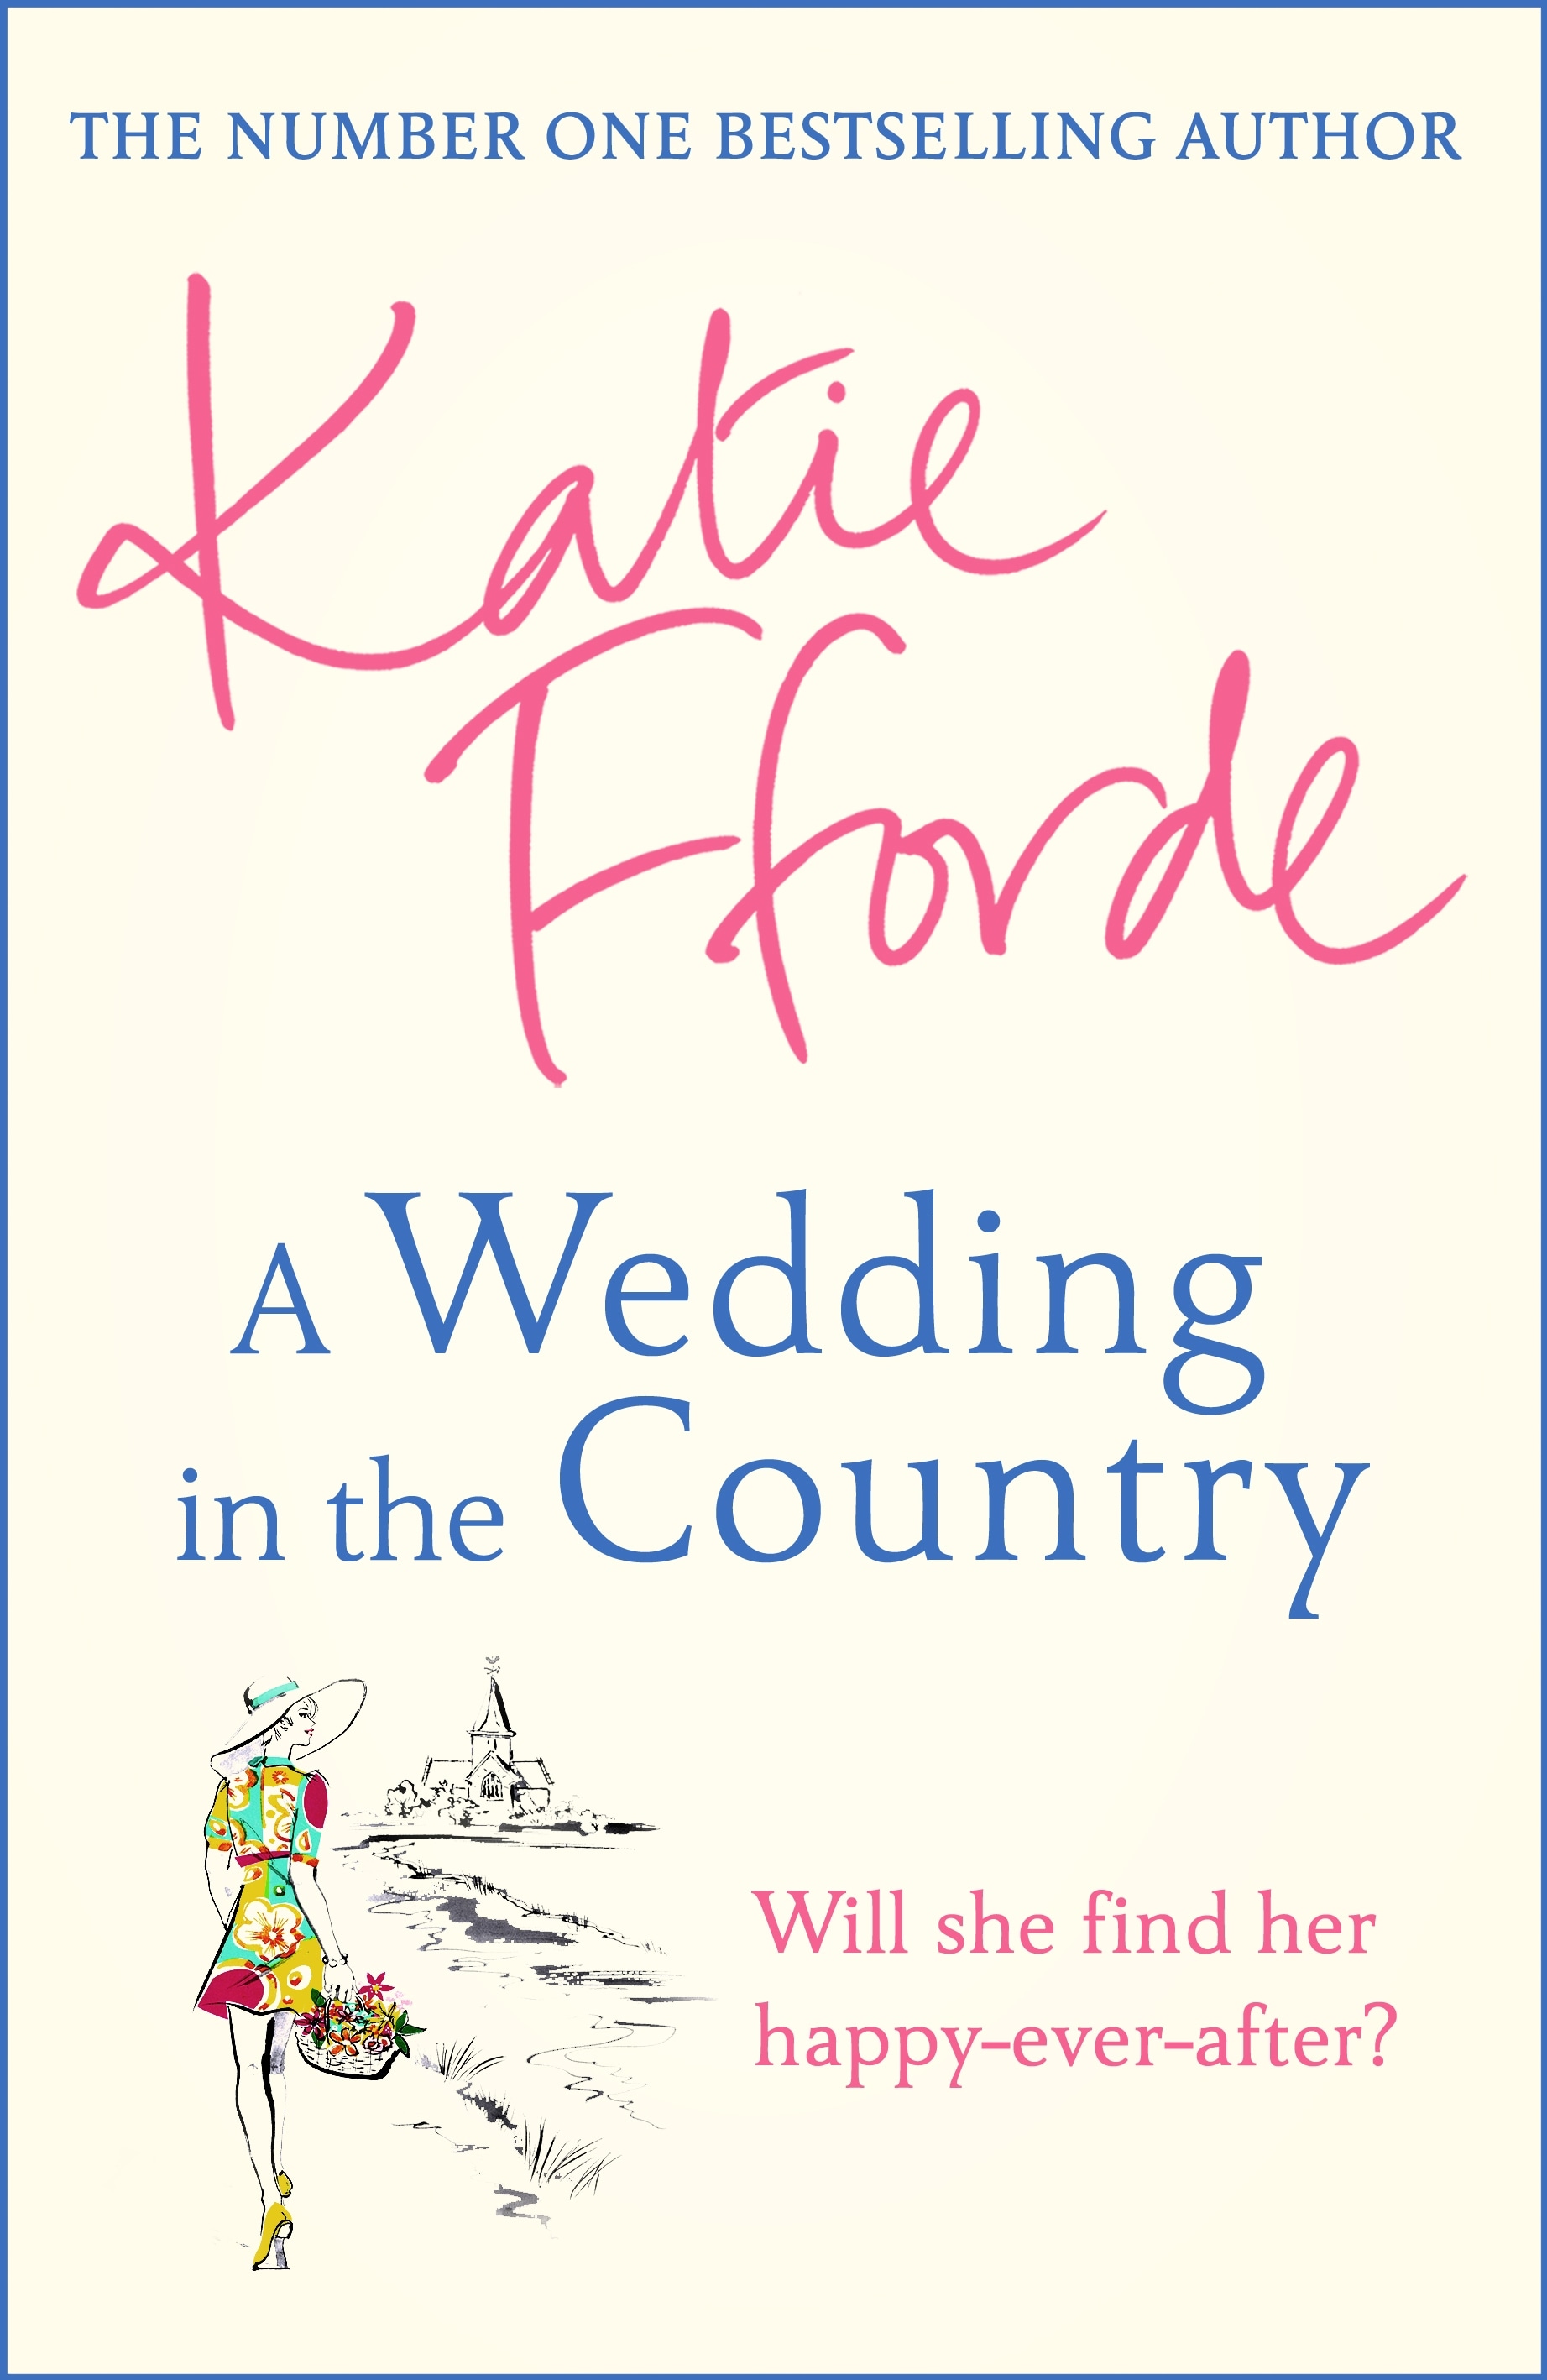 Book “A Wedding in the Country” by Katie Fforde — February 18, 2021